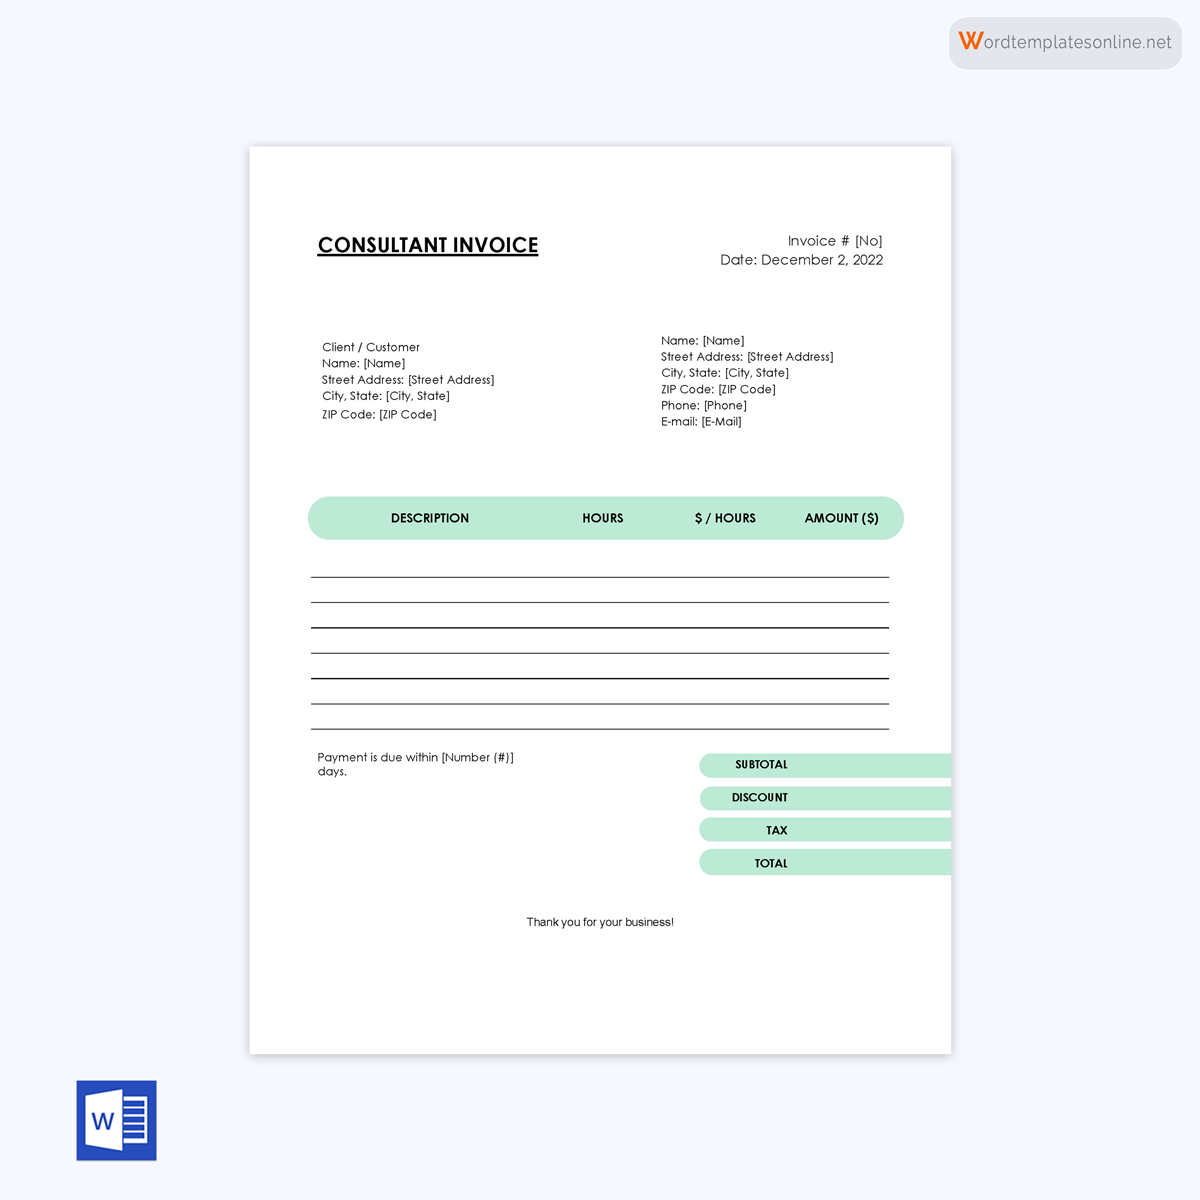 Editable consultant invoice example - printable form